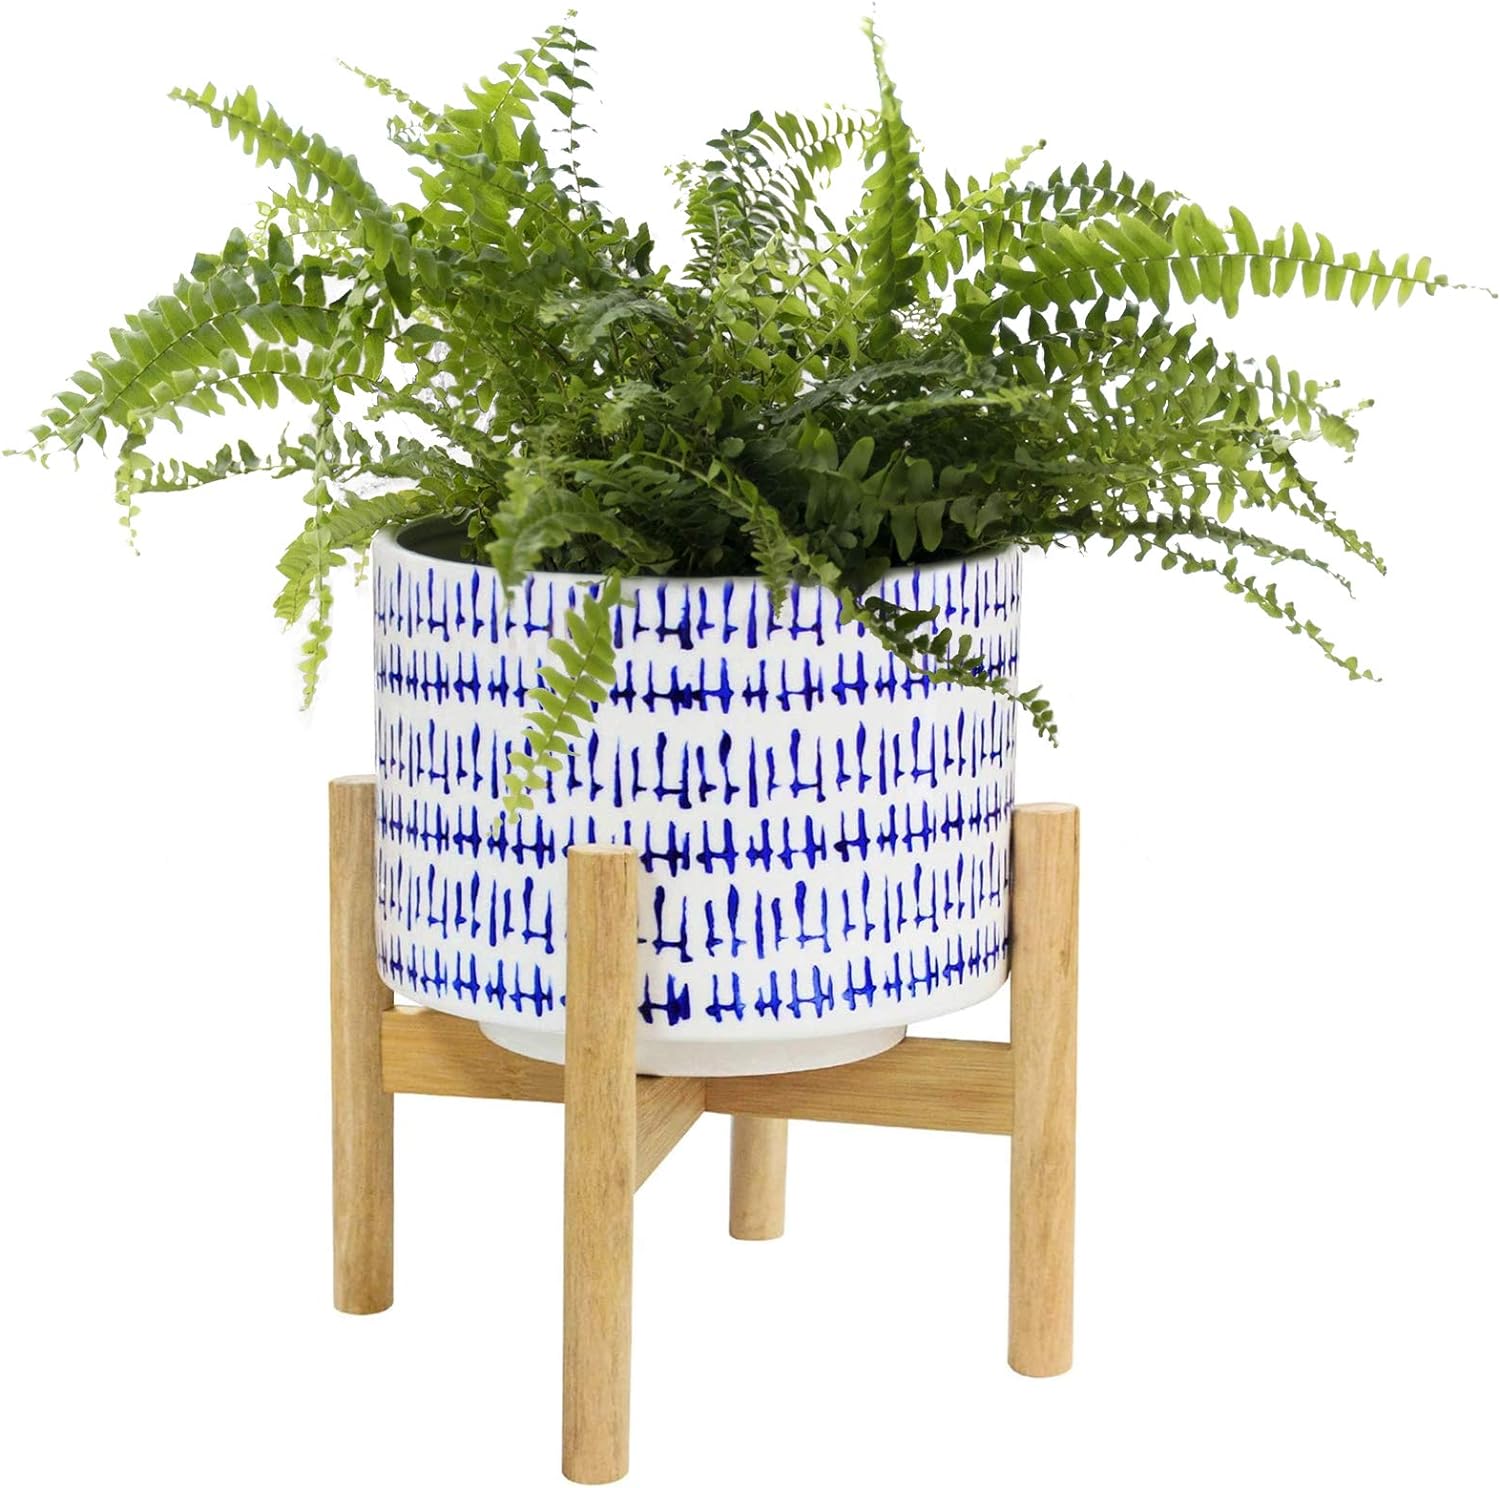 LA JOLIE MUSE Blue Planter with Stand - 7.3 Inch Retro Round Decorative Flower Pot Indoor with Wood Planter Holder, Blue and White, Home Decor Gift